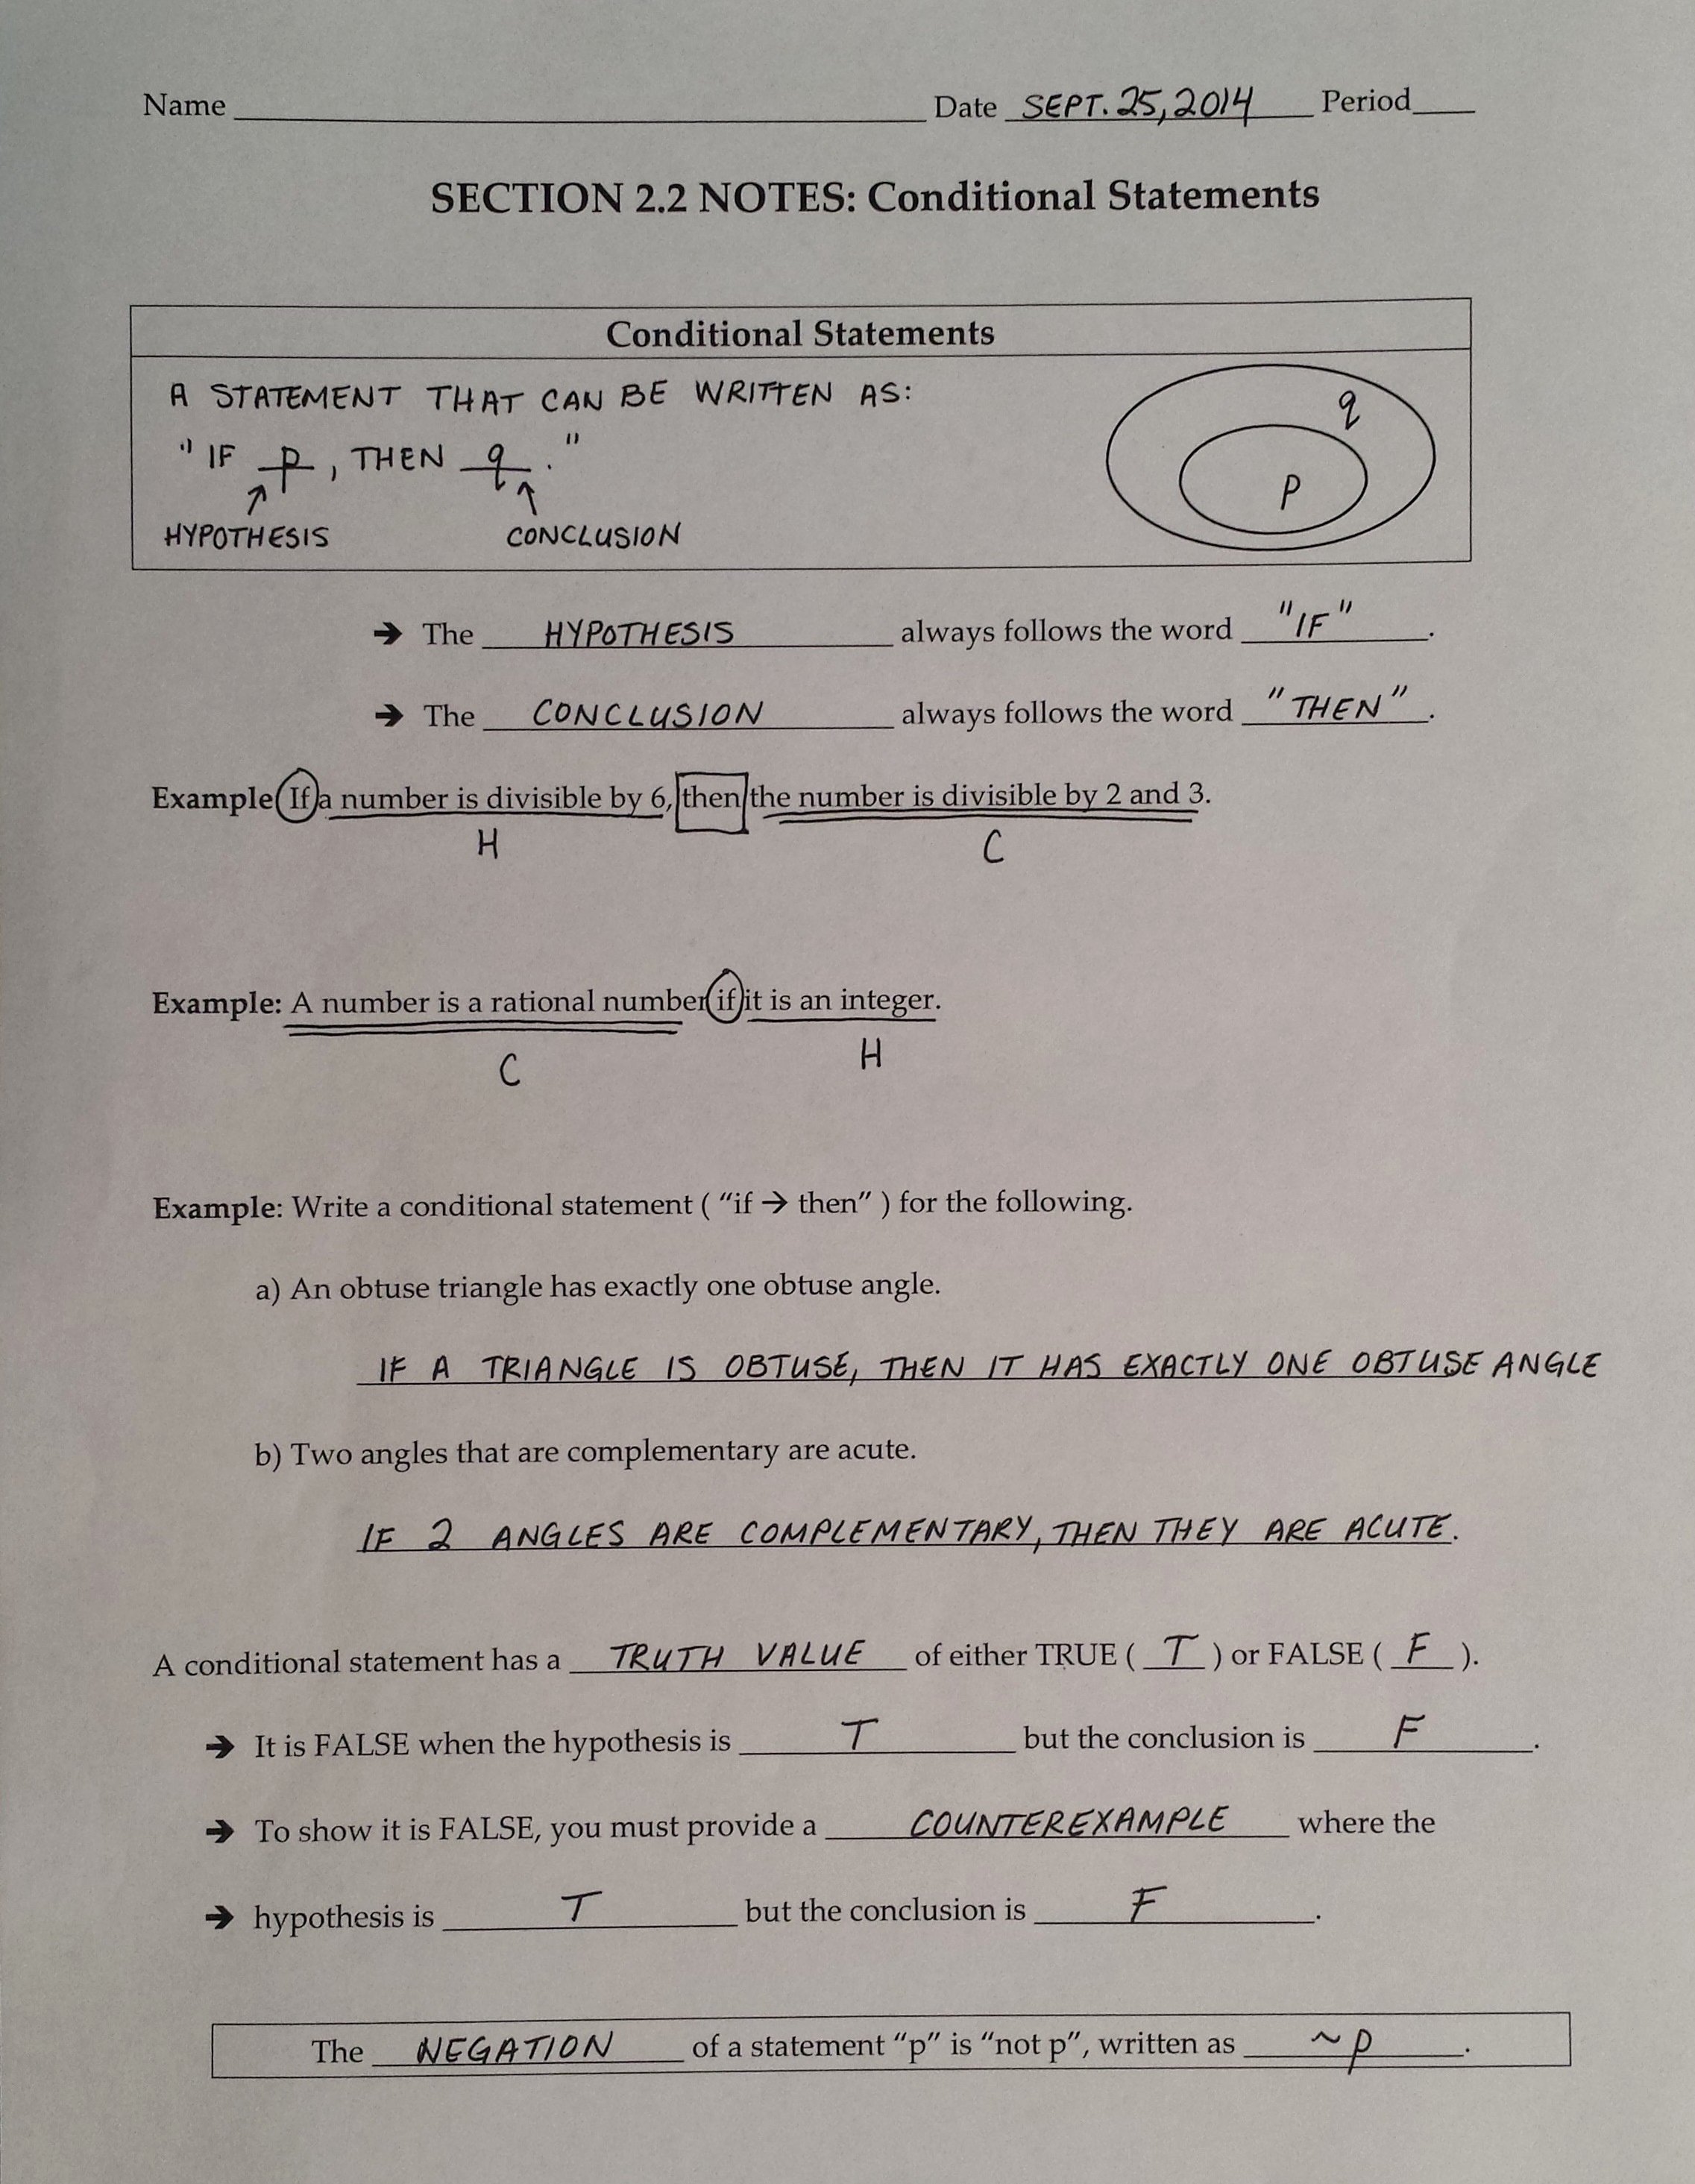 Conditional Statements Worksheet with Answers Awesome Geometry Conditional Statements Worksheet with Answers the